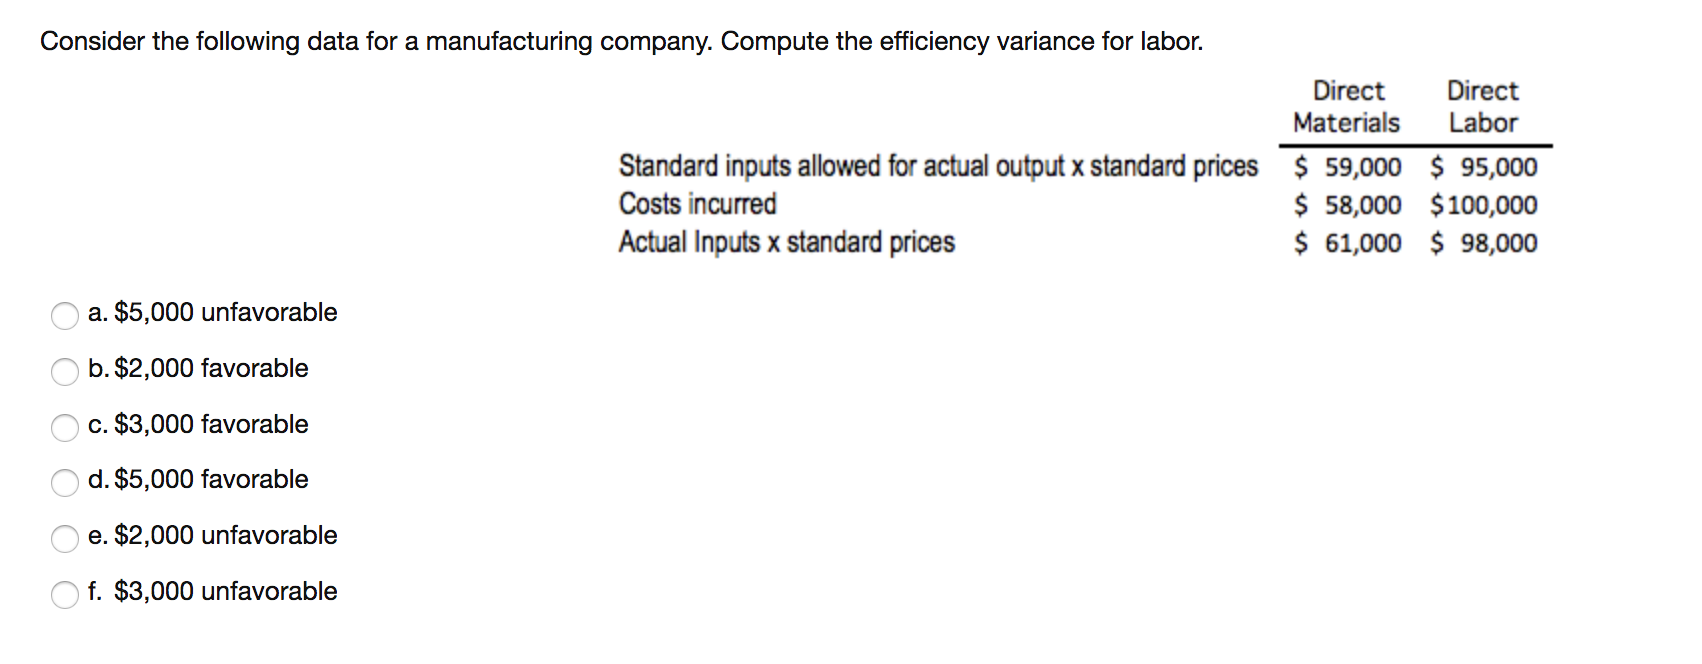 Consider the following data for a manufacturing company. Compute the efficiency variance for labor.
Direct
Direct
Materials
Labor
Standard inputs allowed for actual output x standard prices $ 59,000 $ 95,000
$ 58,000 $100,000
$ 61,000 $ 98,000
Costs incurred
Actual Inputs x standard prices
a. $5,000 unfavorable
b. $2,000 favorable
c. $3,000 favorable
d. $5,000 favorable
e. $2,000 unfavorable
f. $3,000 unfavorable
